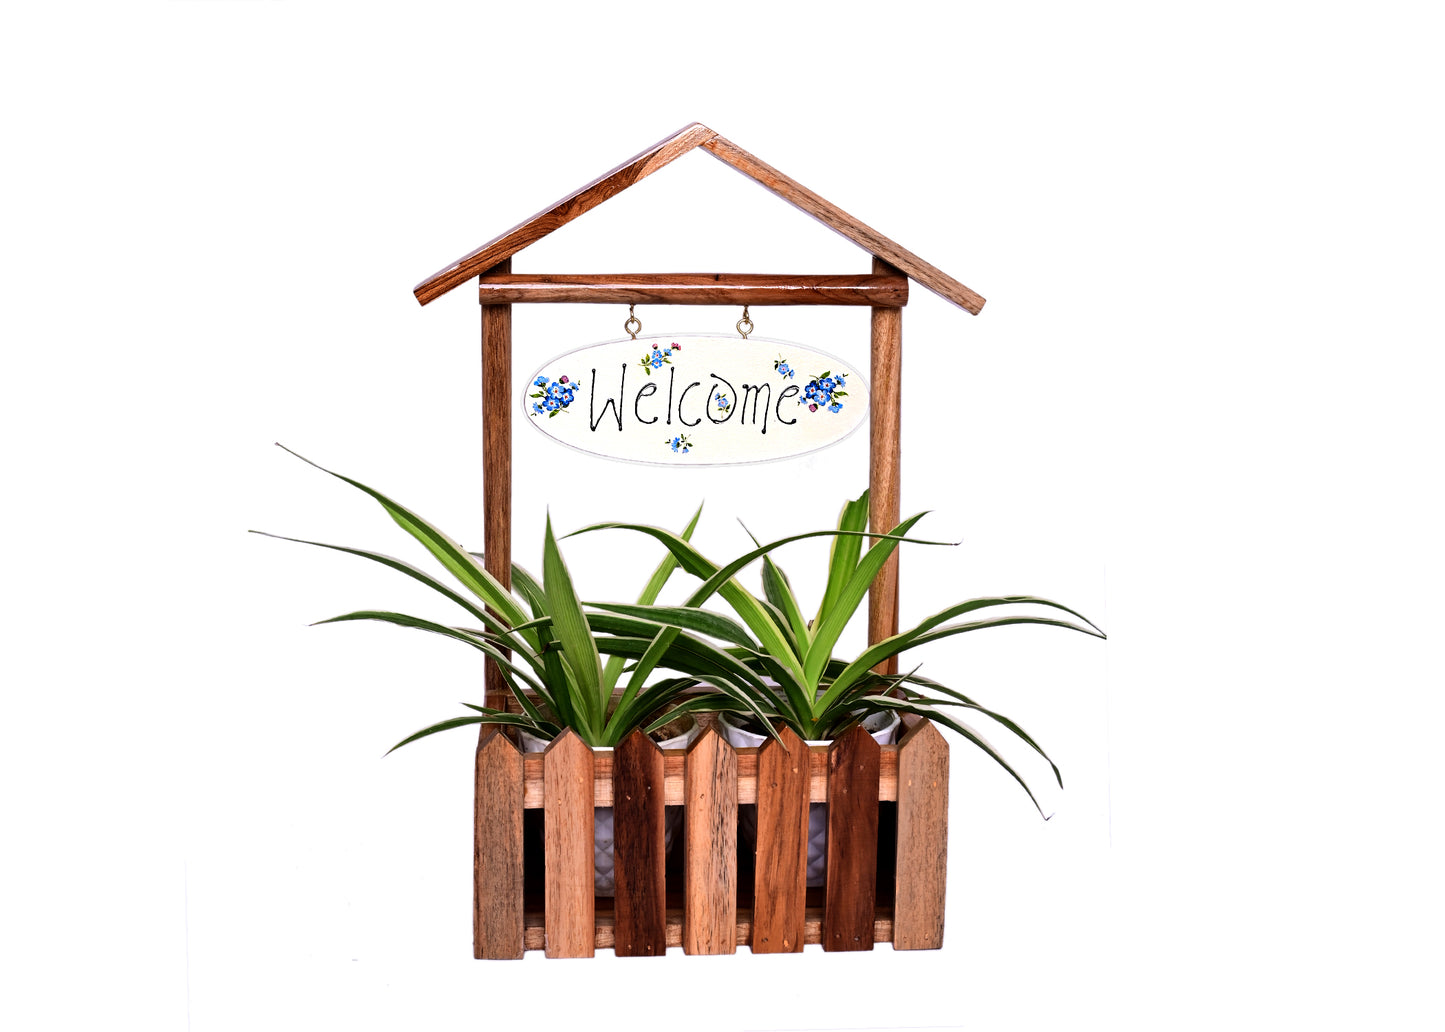 The Weaver's Nest Wooden Welcome Decorative Fence Planter for Indoor, Home Decor, Entrance, Living Room, Garden, Balcony (Brown, 30 X 16 X 40 cm)